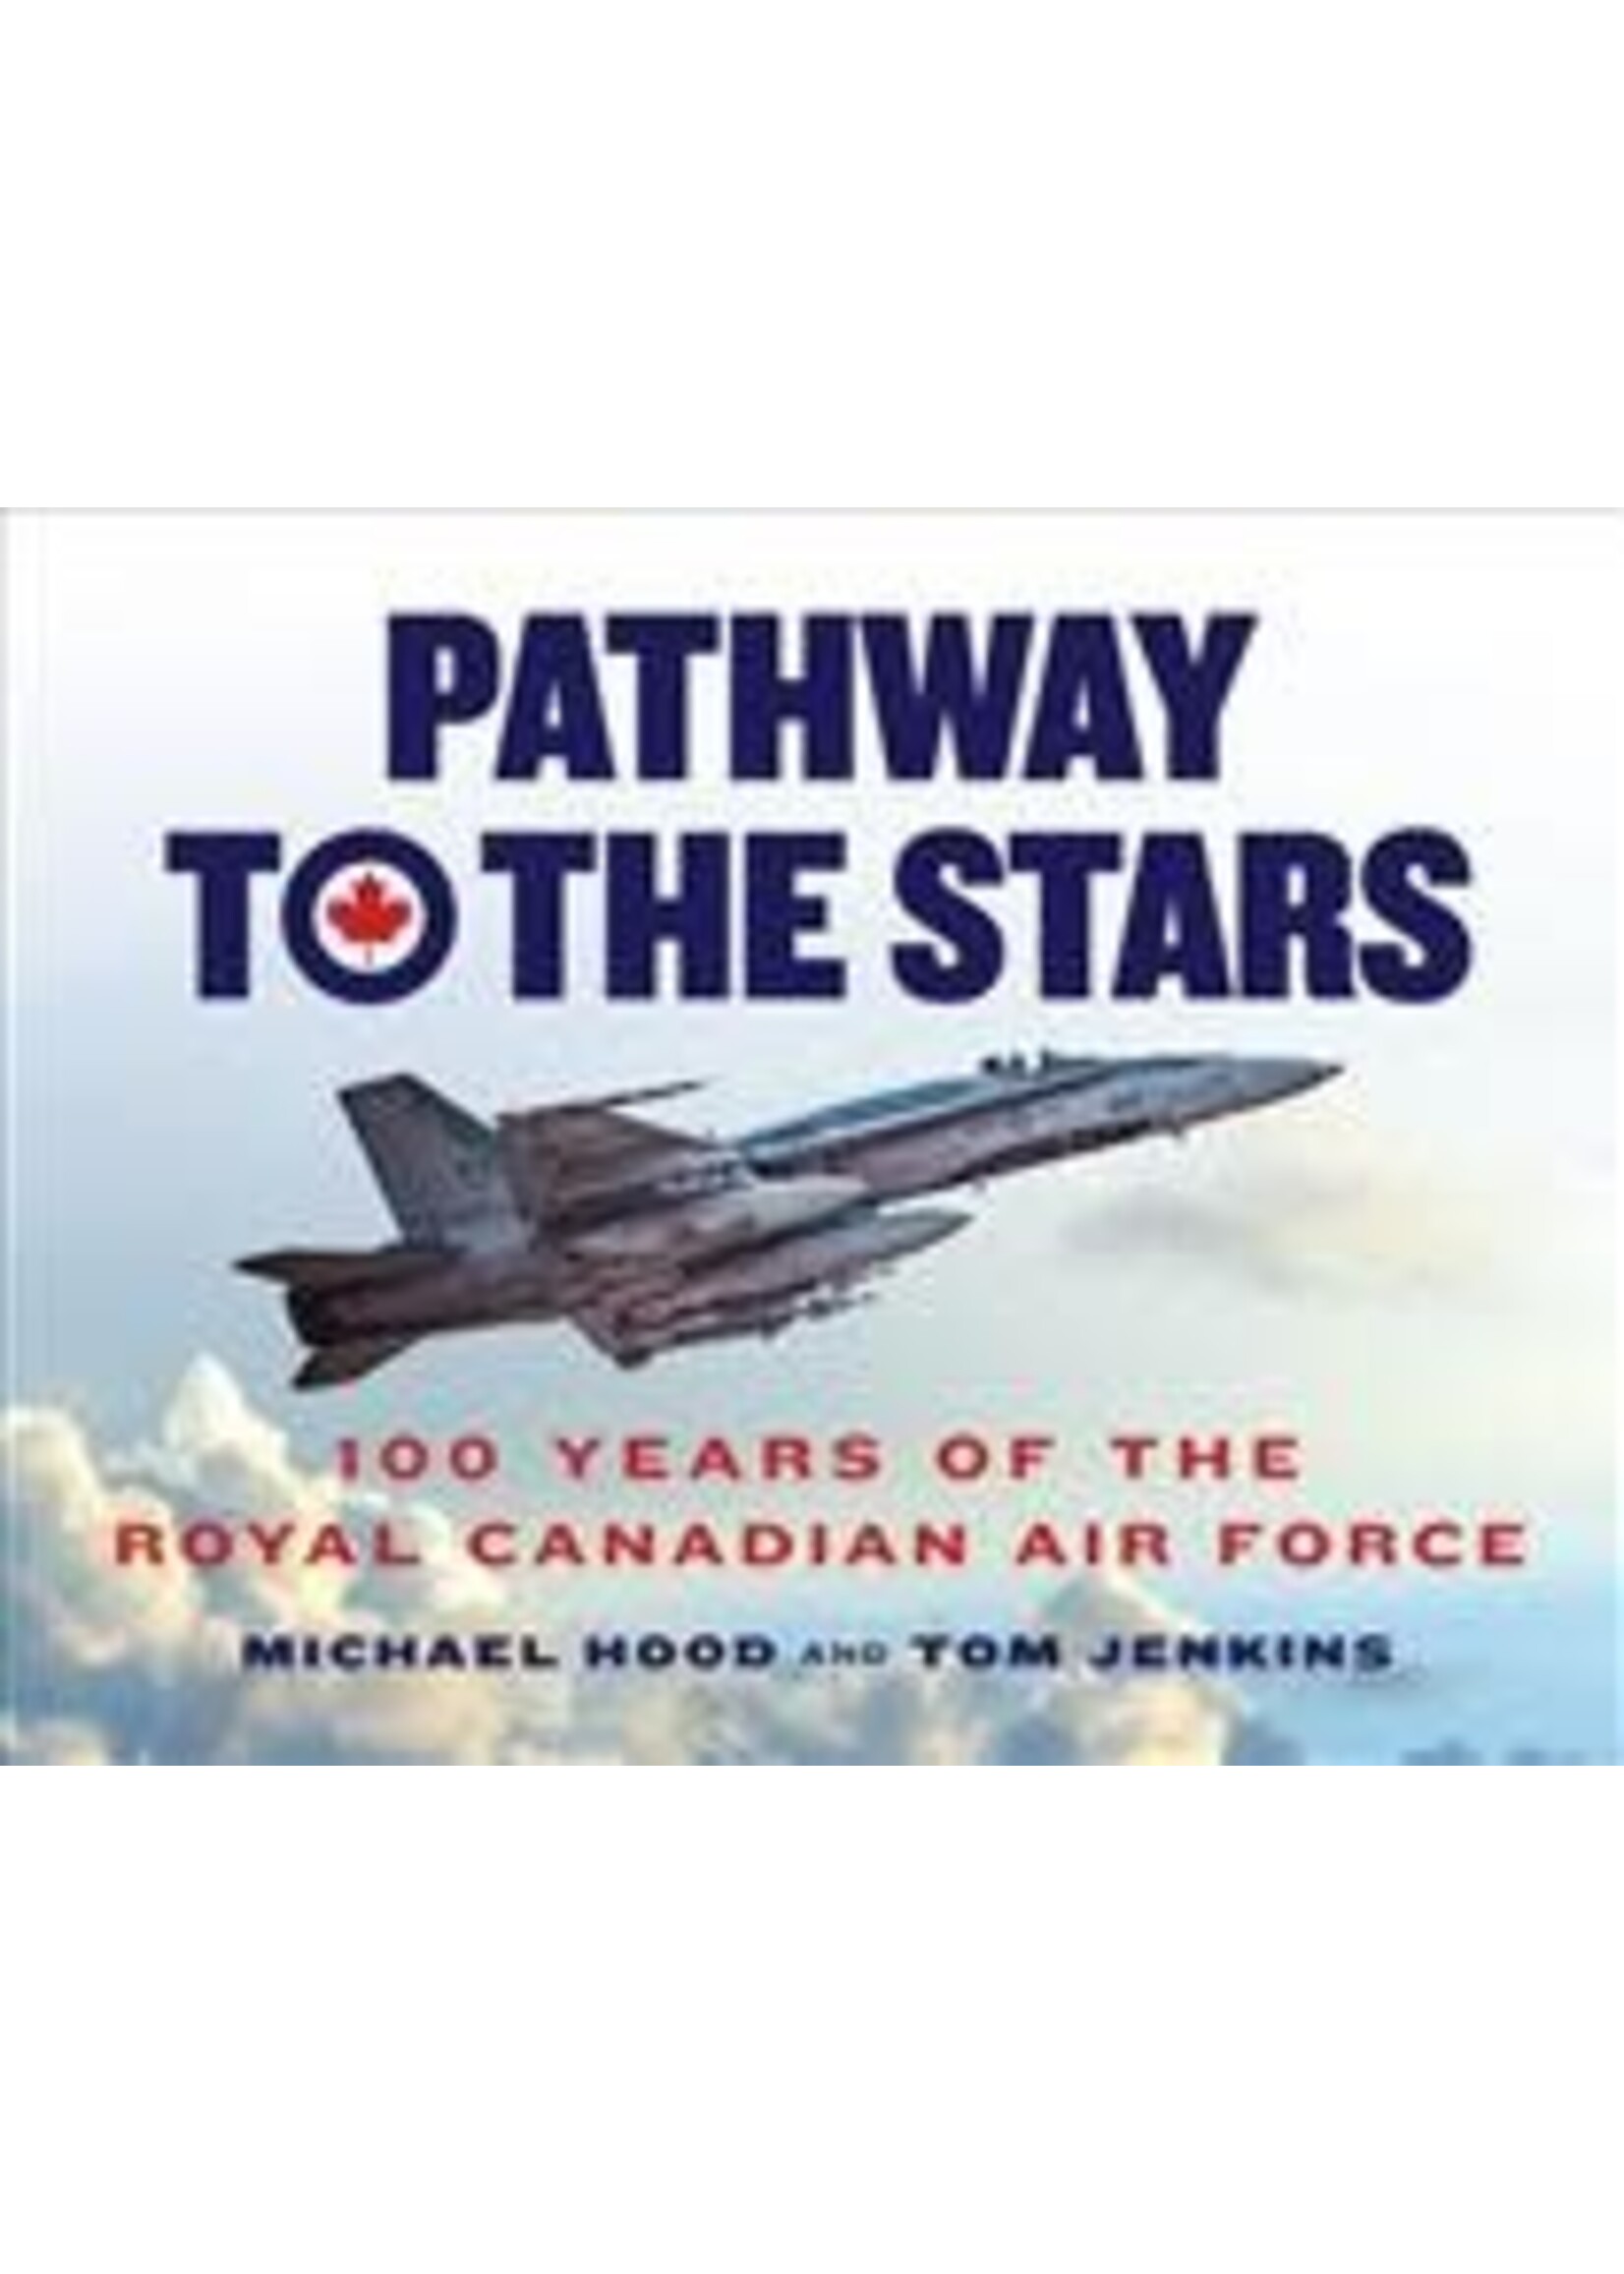 The Royal Canadian Air Force